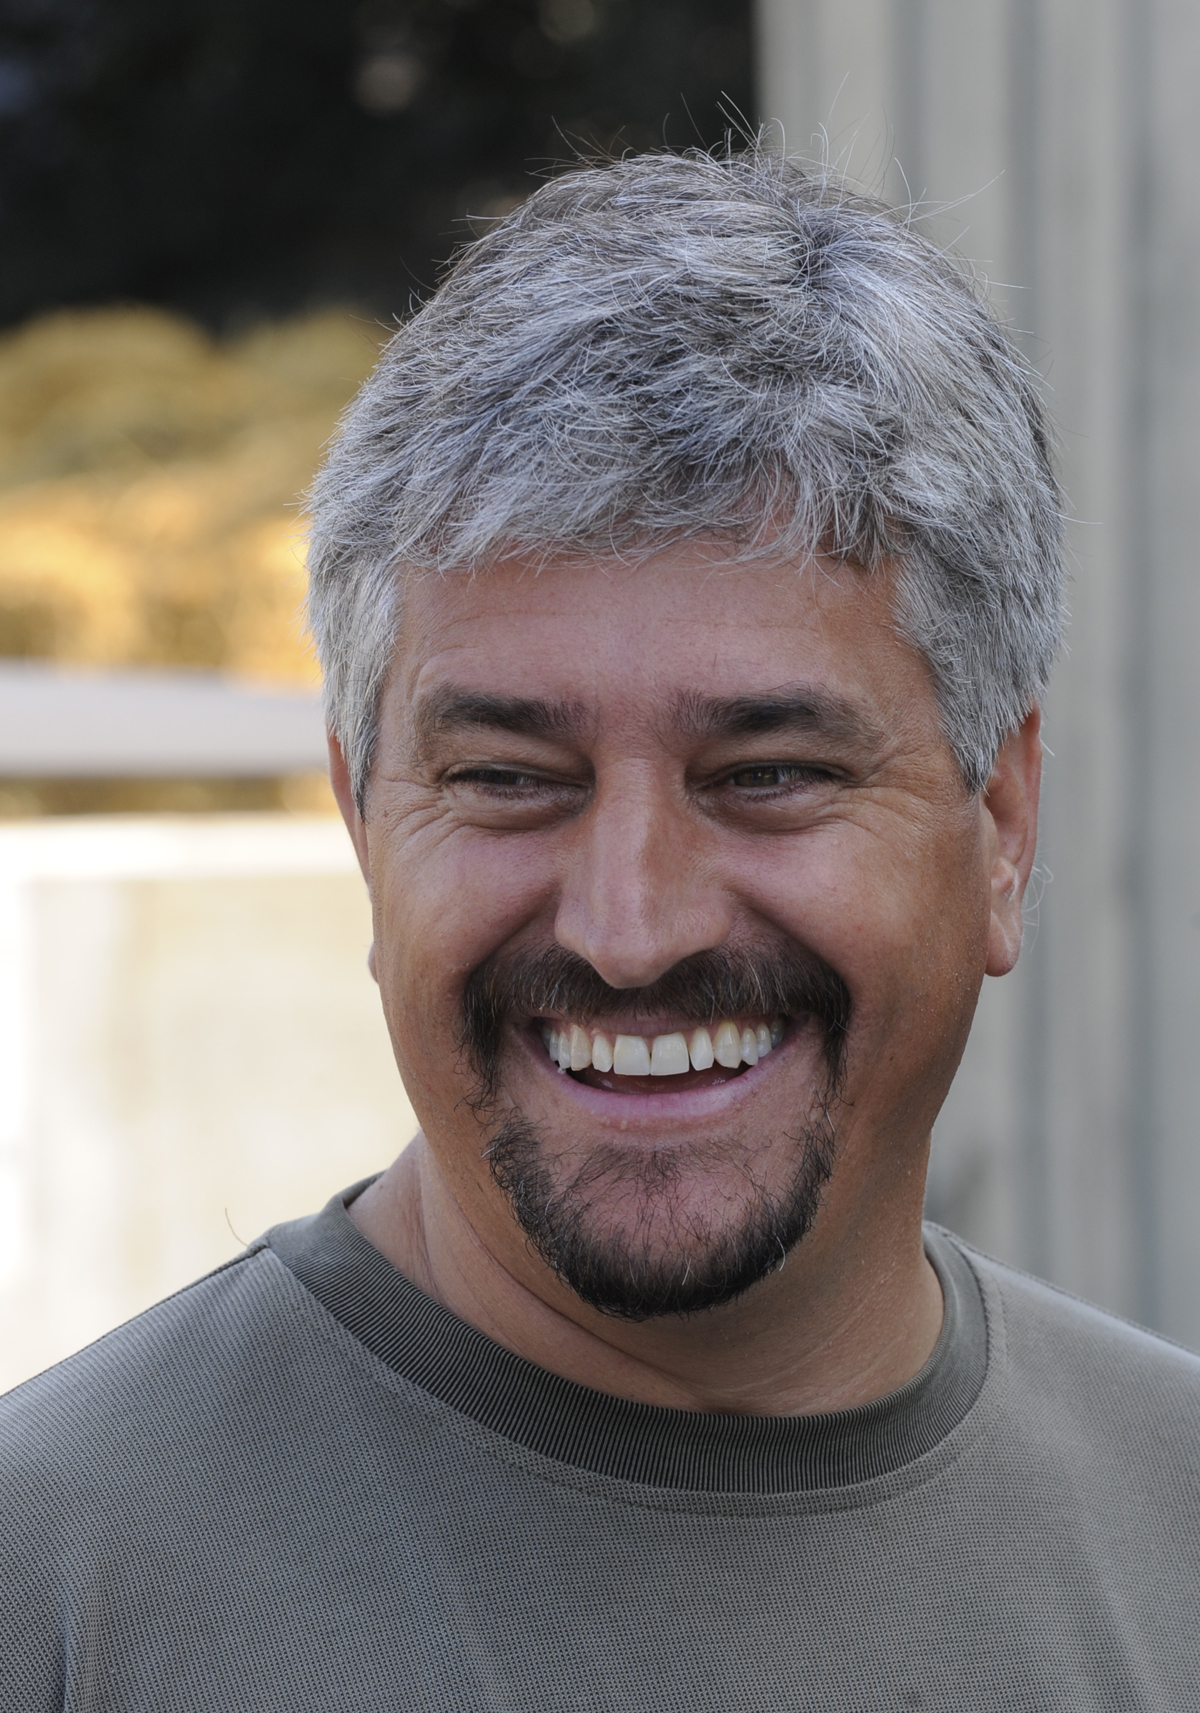 Steve Asmussen after seeing Rachel Alexandra arrive safely back at his barn at the Oklahoma Training Track, August 2009 (Skip Dickstein)